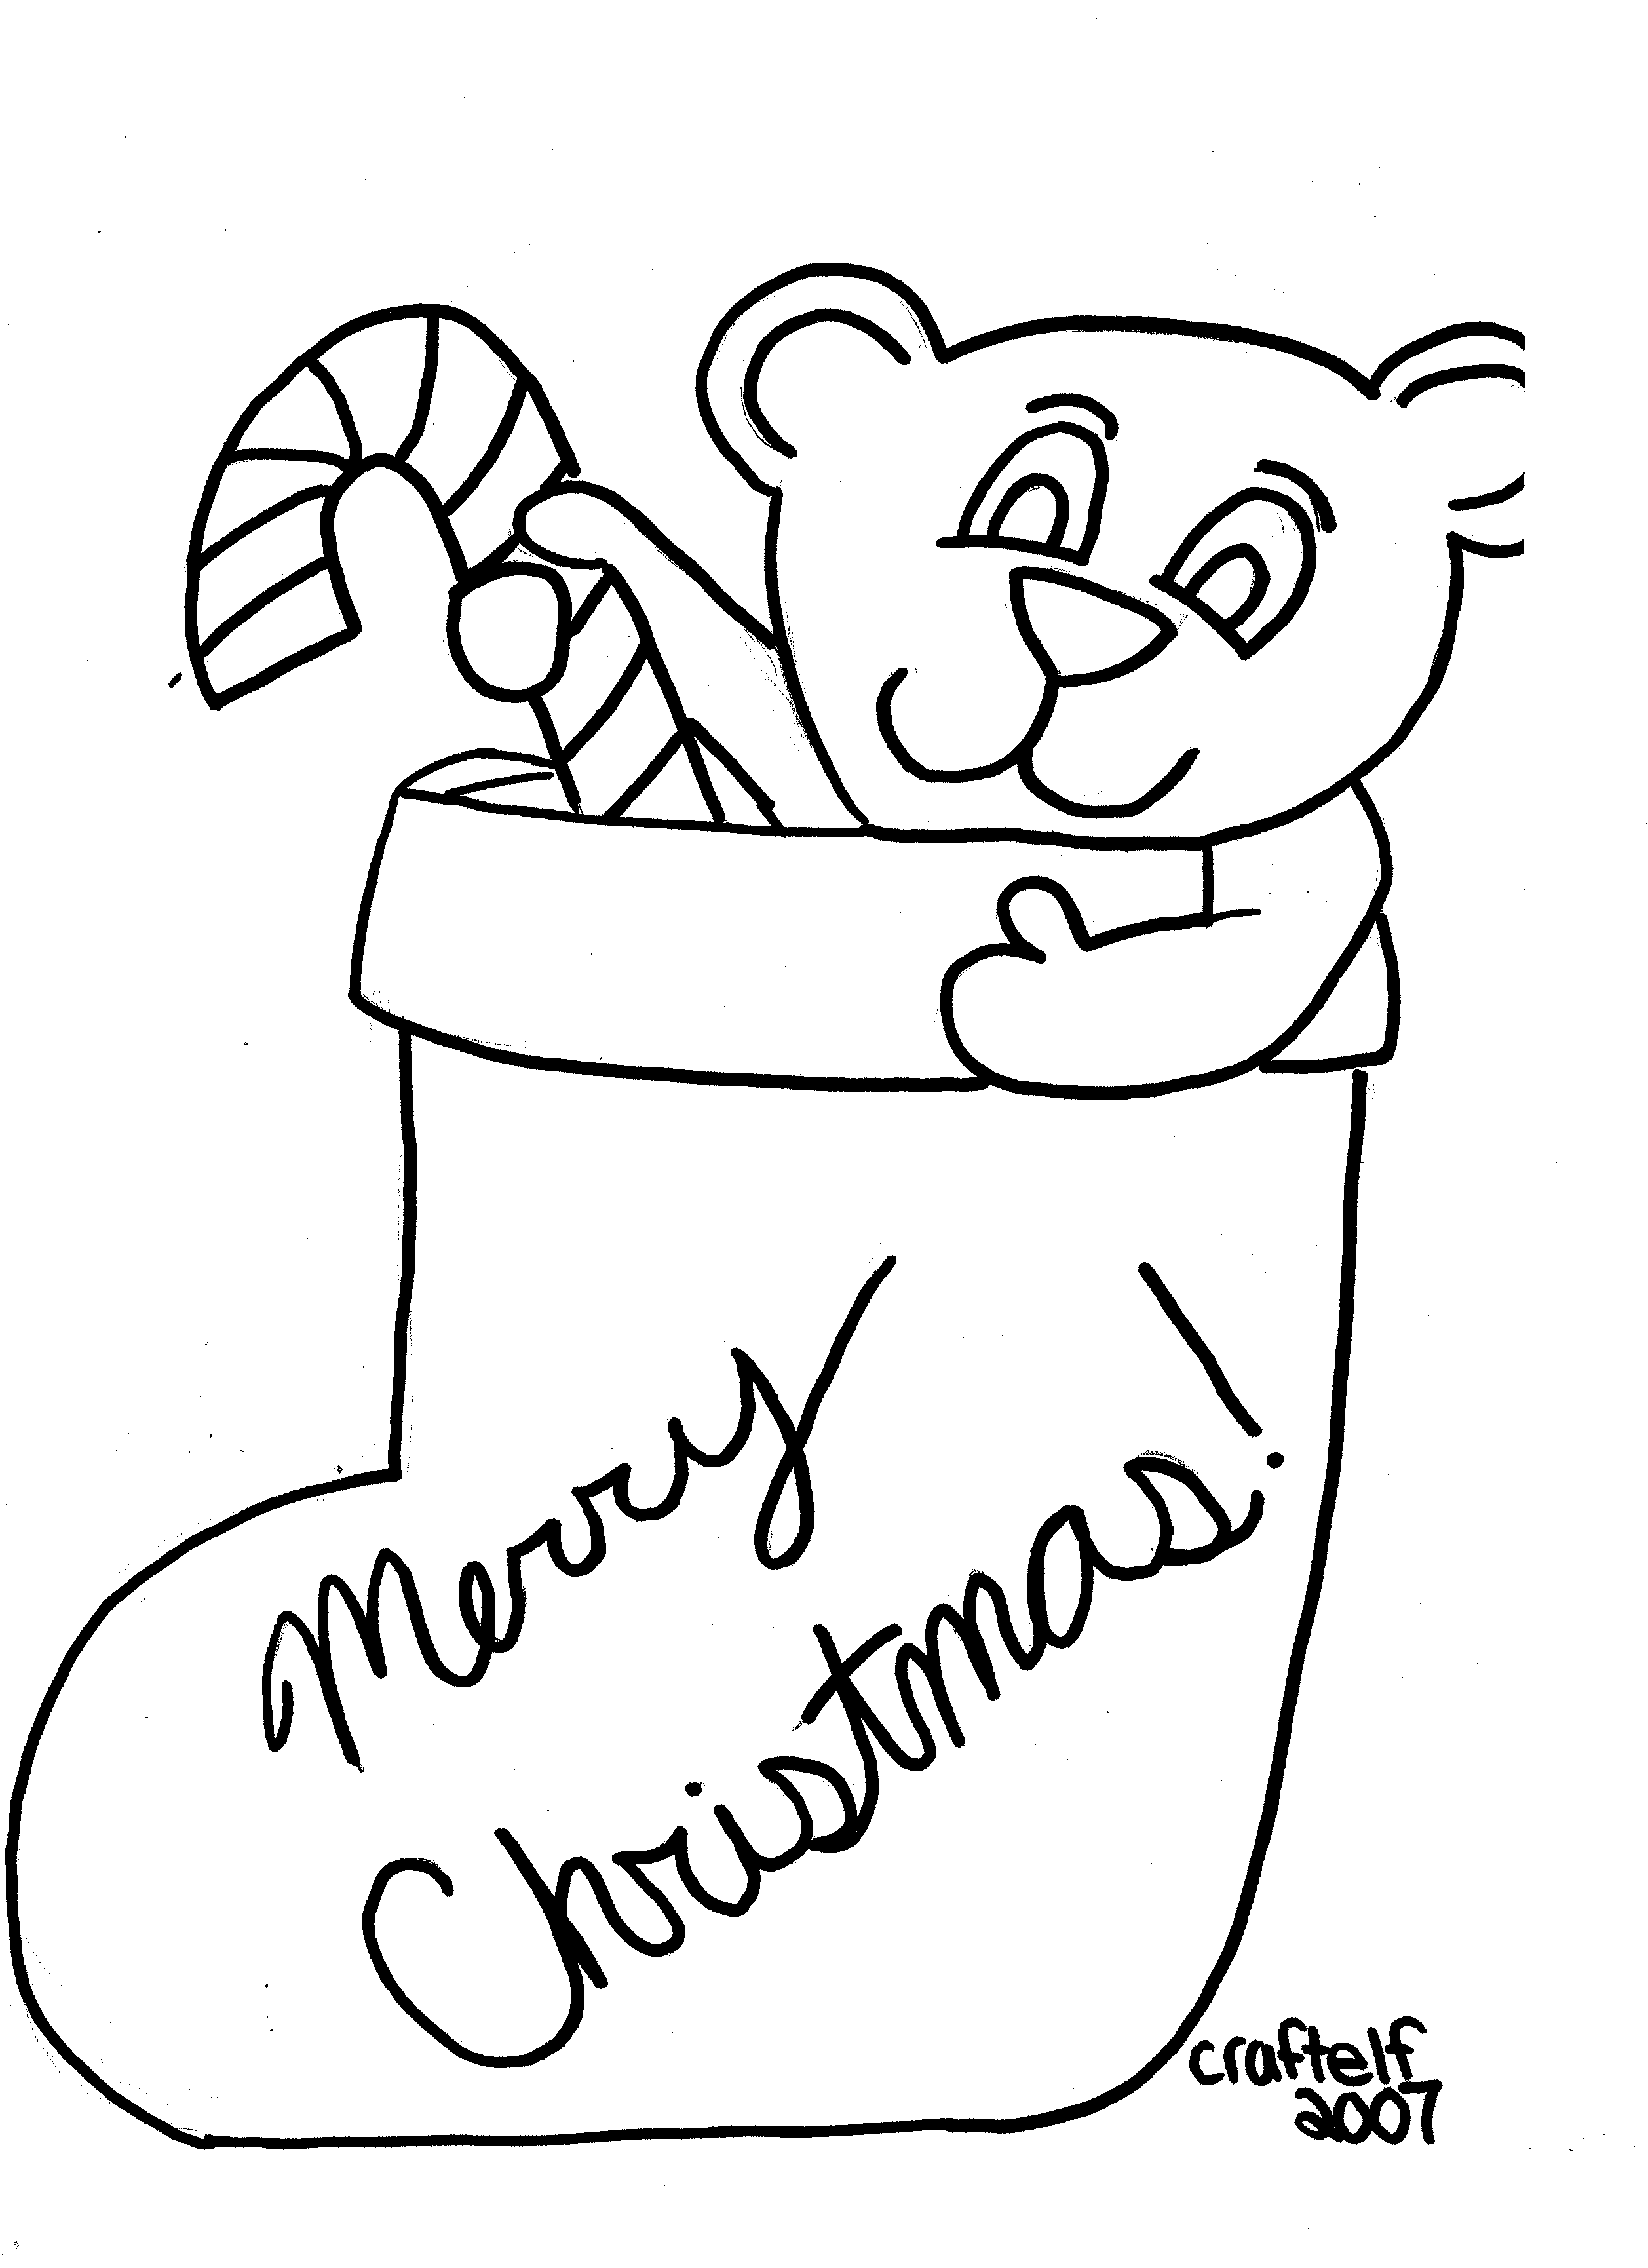 Free printable coloring page - Teddy bear in Christmas stocking